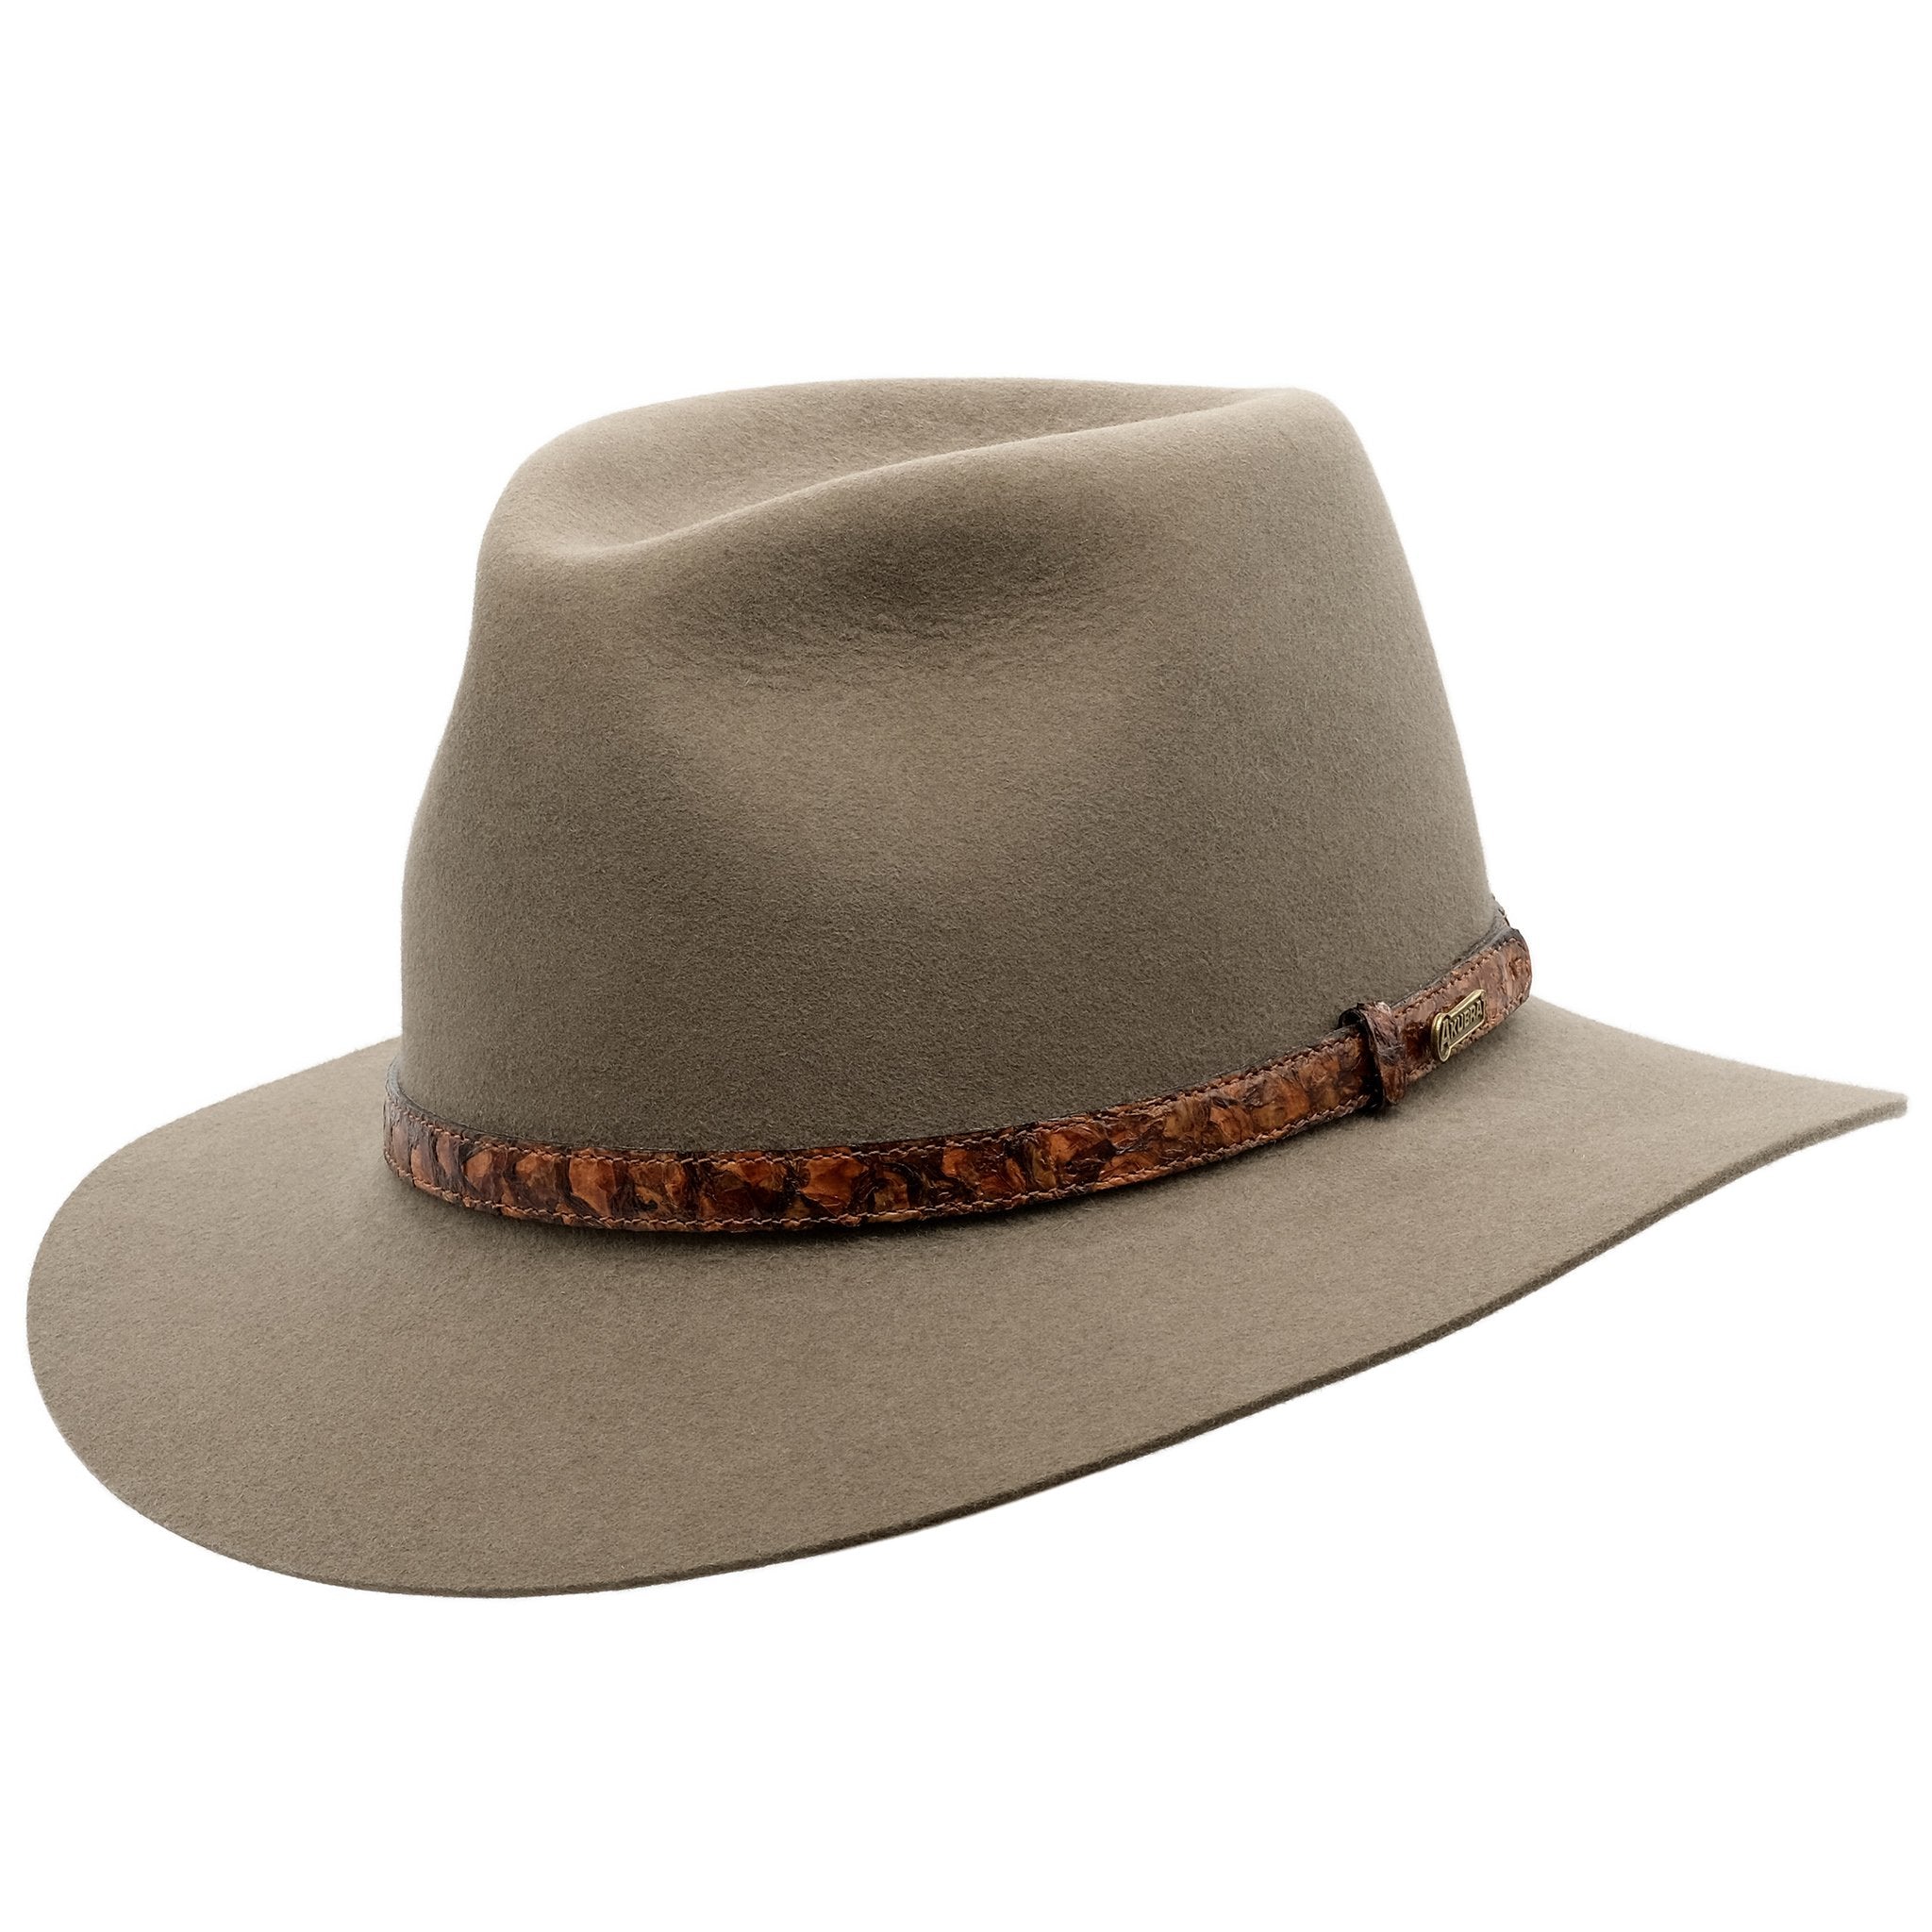 Angle view of Akubra Banjo Paterson hat in Heritage Fawn colour